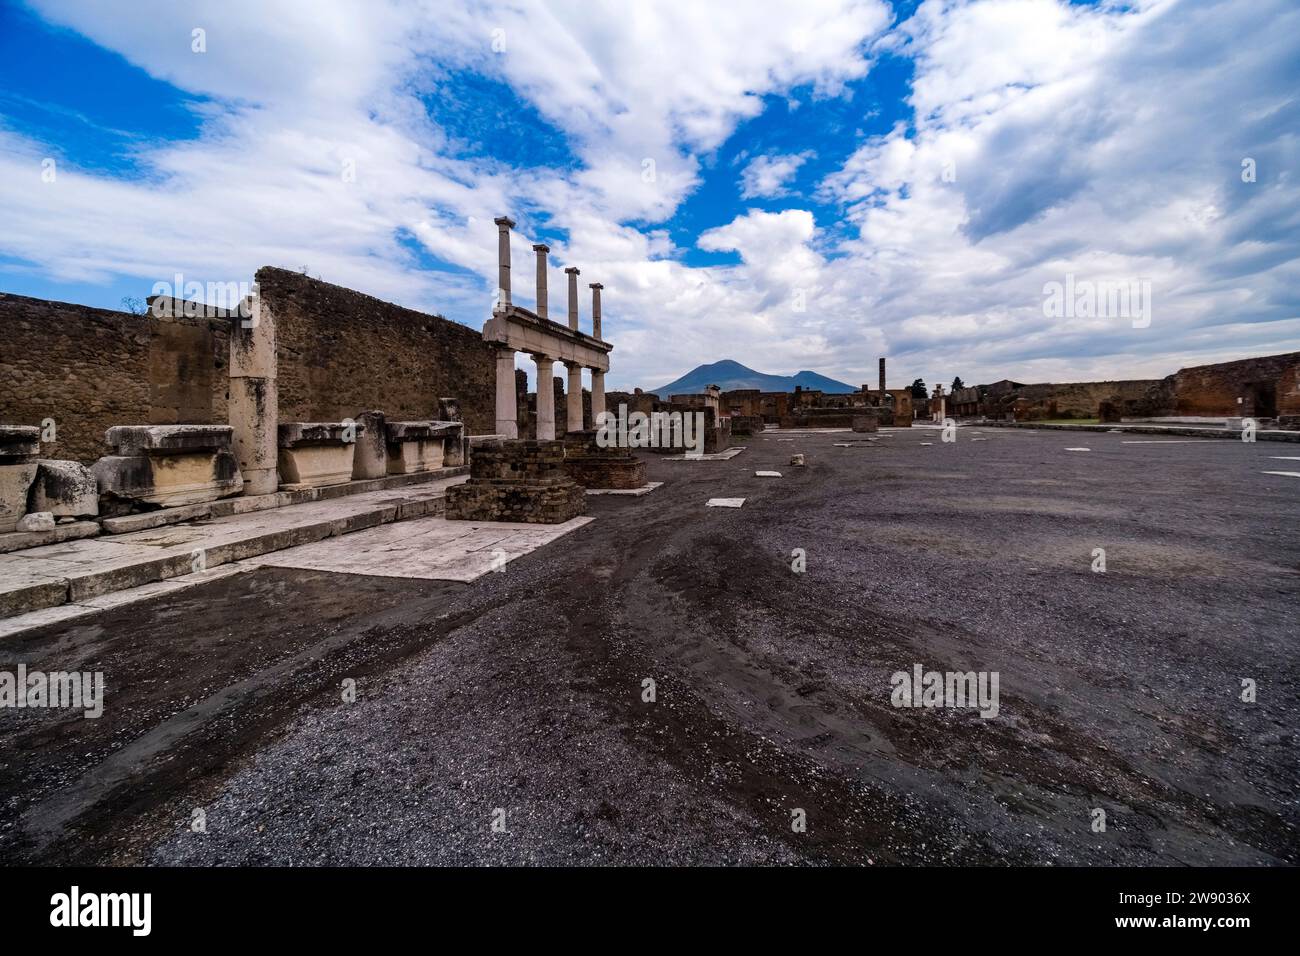 Ruins of the Forum in the archaeological site of Pompeii, an ancient city destroyed by the eruption of Mount Vesuvius in 79 AD. Stock Photo